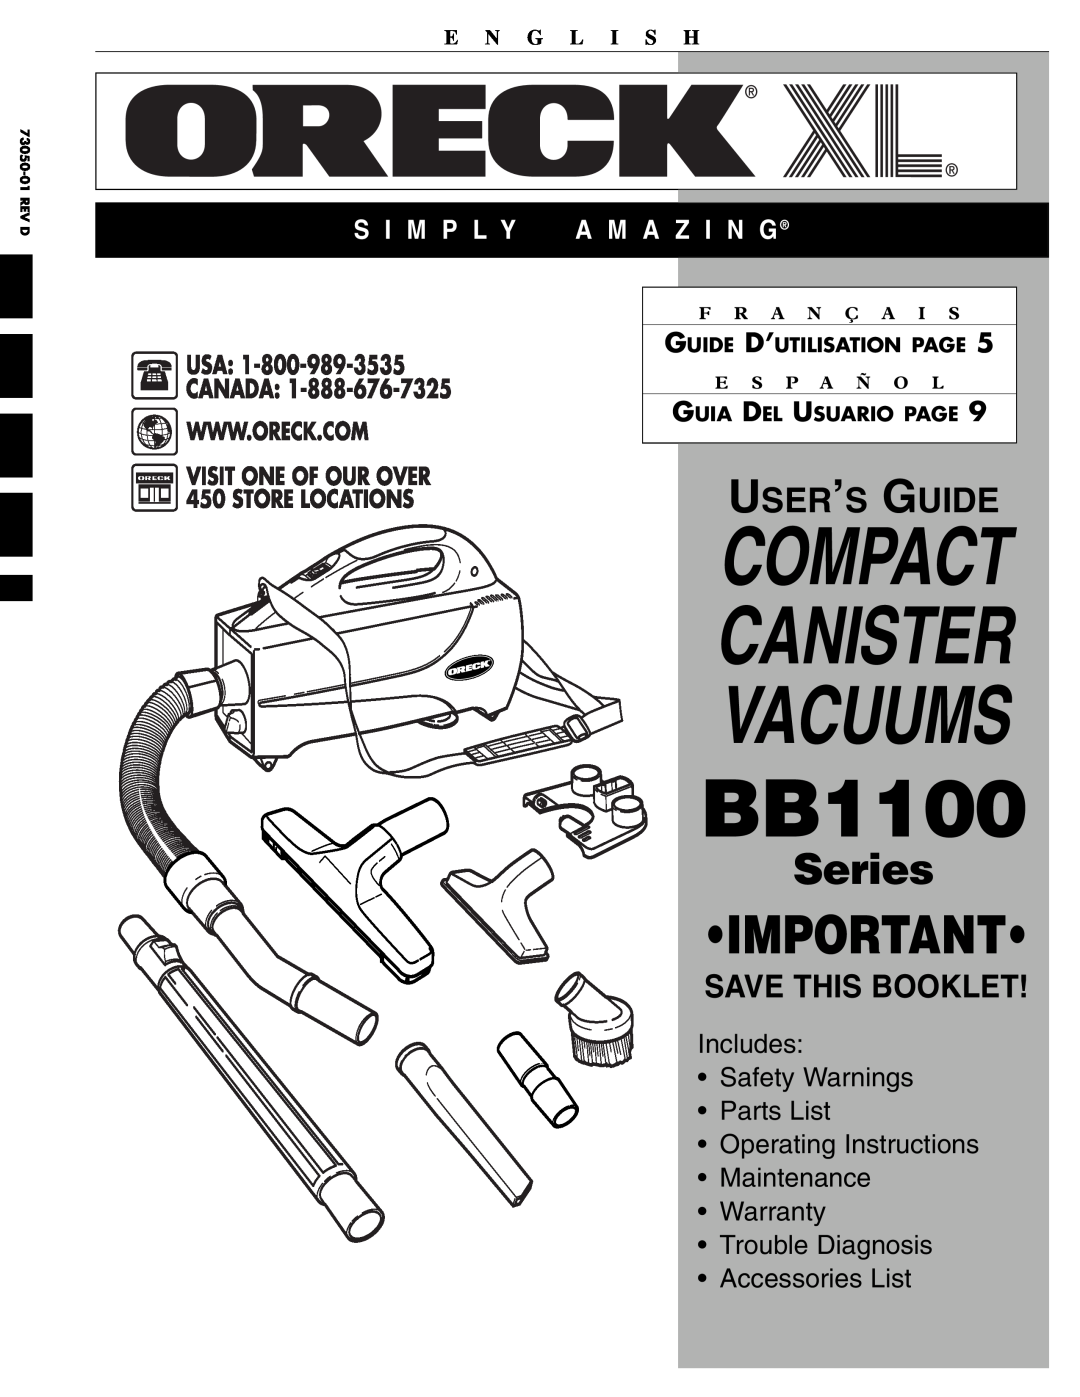 Oreck BB1100 warranty E N G L I S H, Guide D’Utilisation Page, Guia Del Usuario Page, Compact Canister Vacuums, Series 